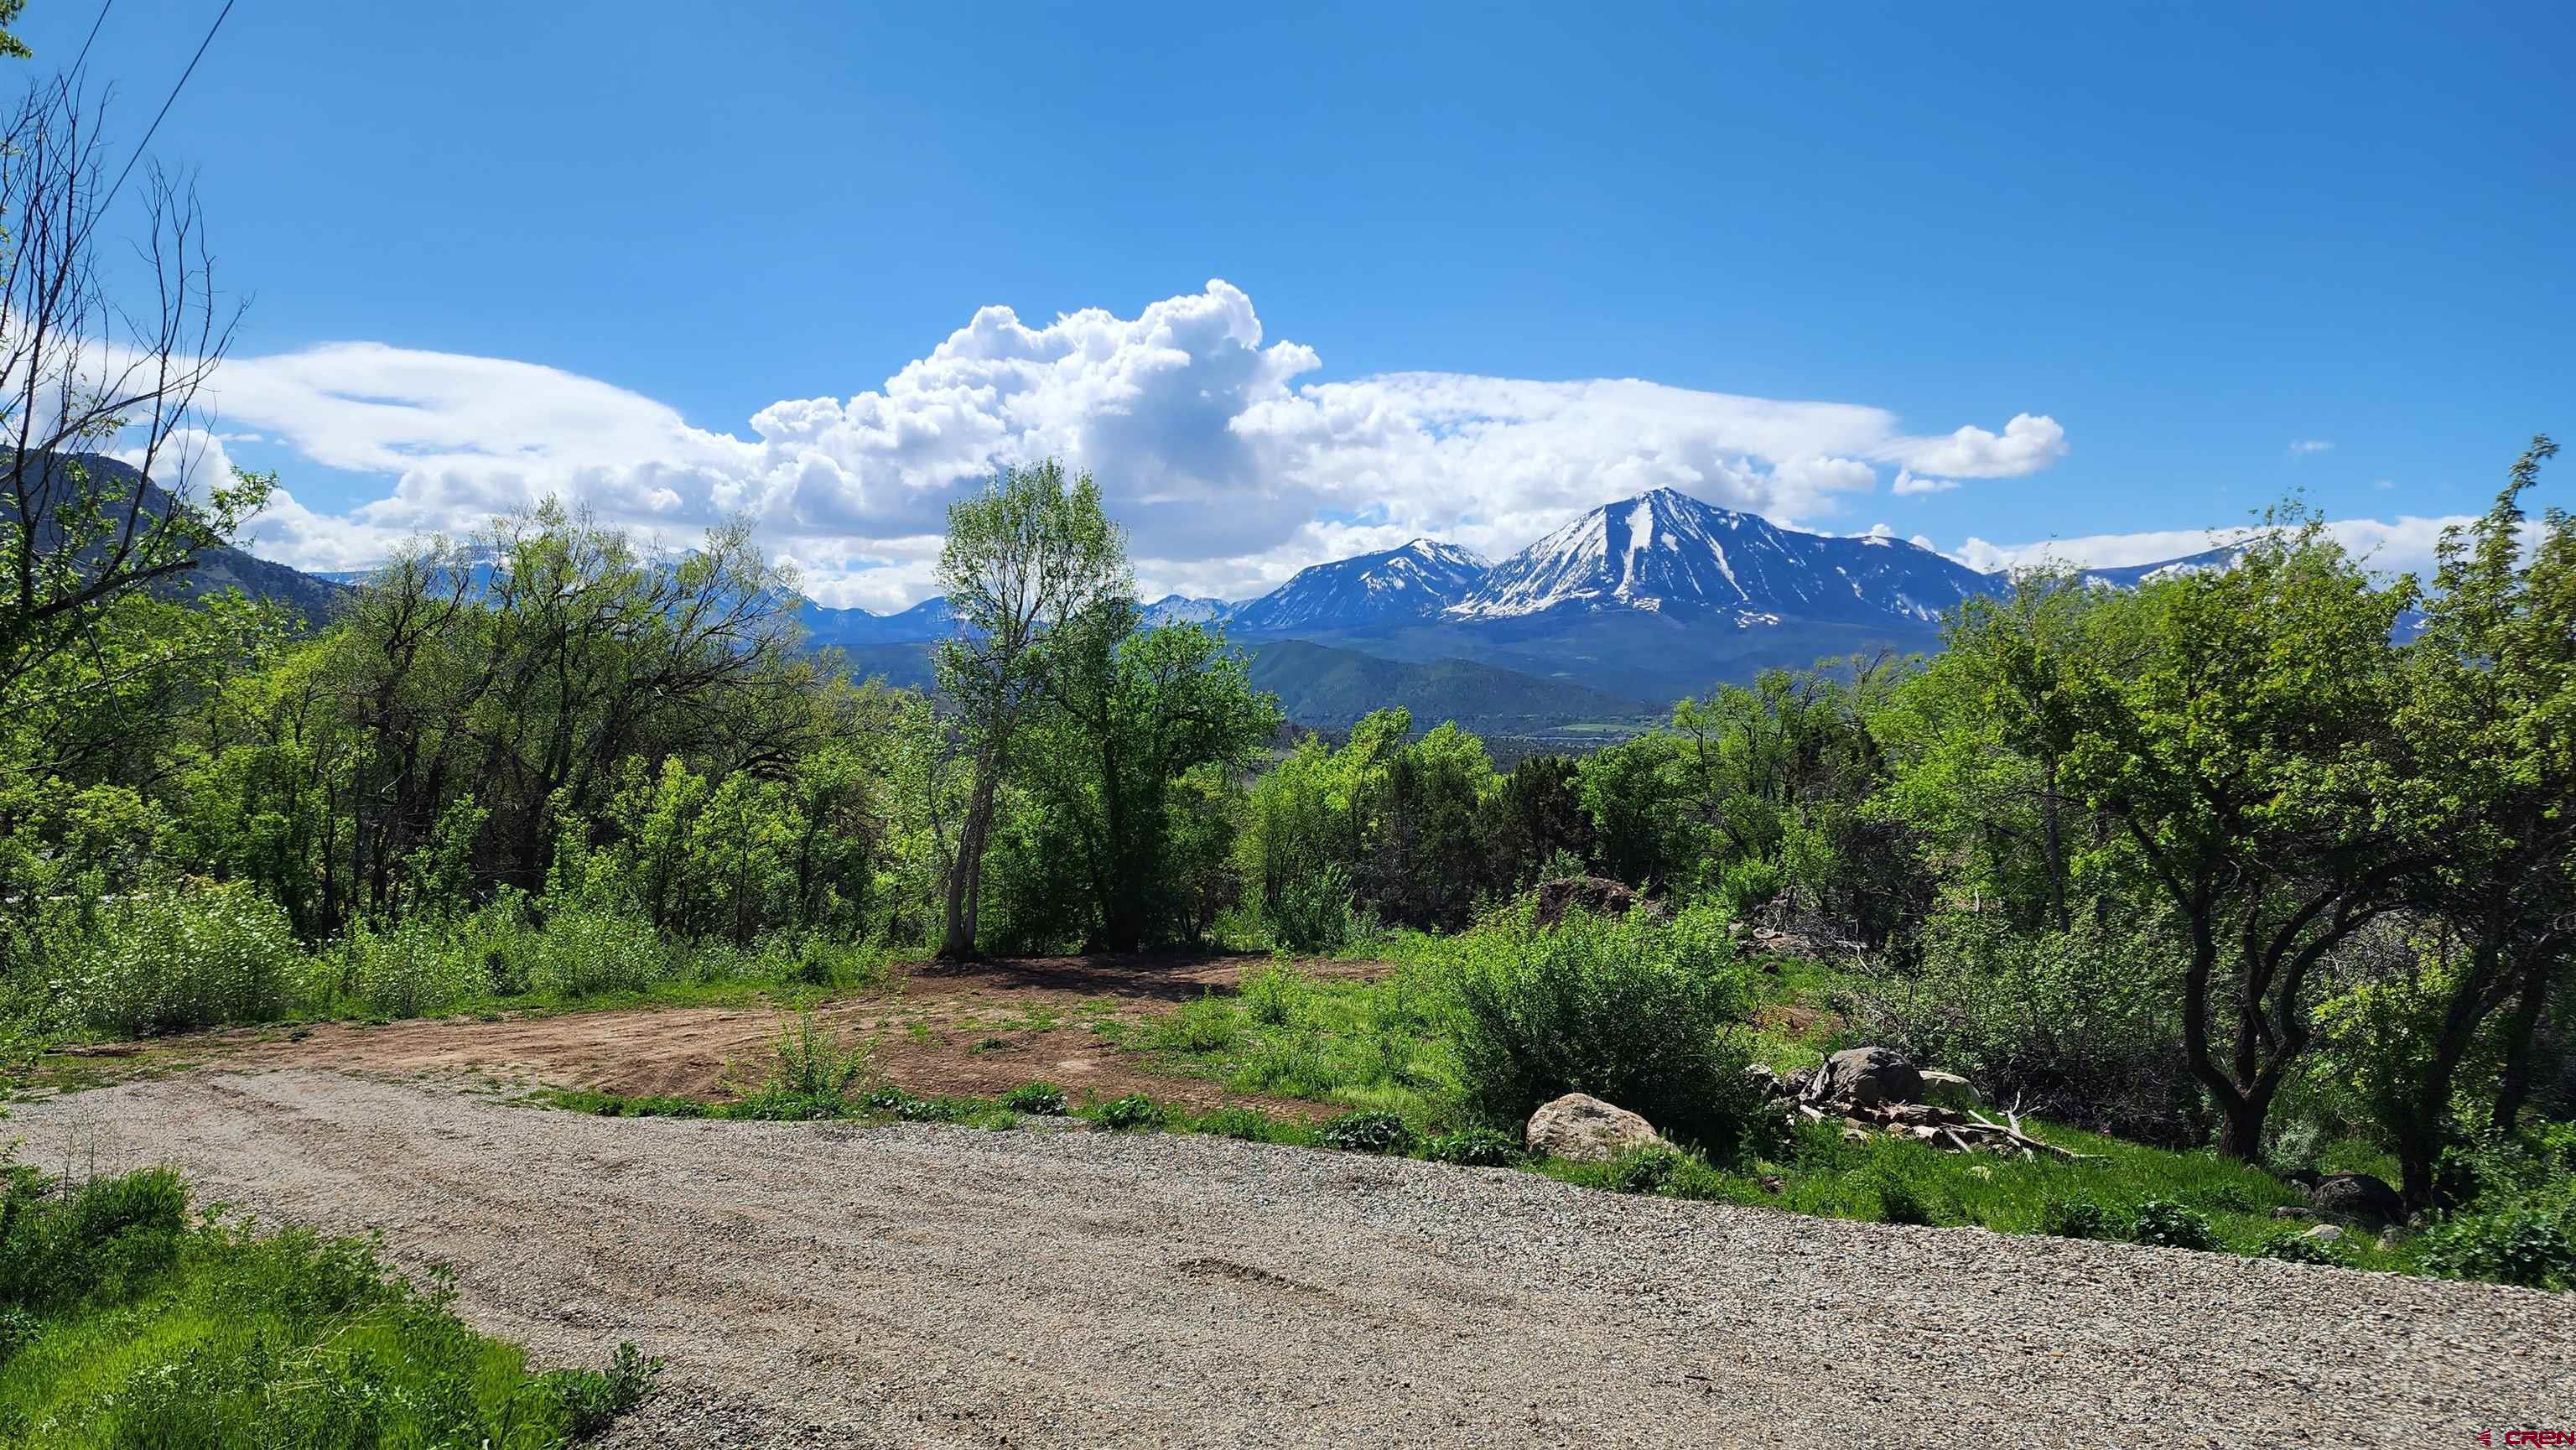 Very rare small two acre property with a well in Paonia. Five minute drive to town (1.7 miles), half a mile to Azura winery, beautiful views of the West Elks and Mt. Lamborn. Driveway and well are both installed. Septic has been engineered and permit has been issued though system is not yet installed. Site prep has been started including some dead tree removal. Electric is on the road. A lush property that provides privacy. Several apricot fruit trees. The North Fork Valley is a welcoming, thriving community with wineries, orchards, live music, farmer's markets, restaurants, grocery, art studios, breweries, movie theatre, hotels and more. Come fall in love with this beautiful location!